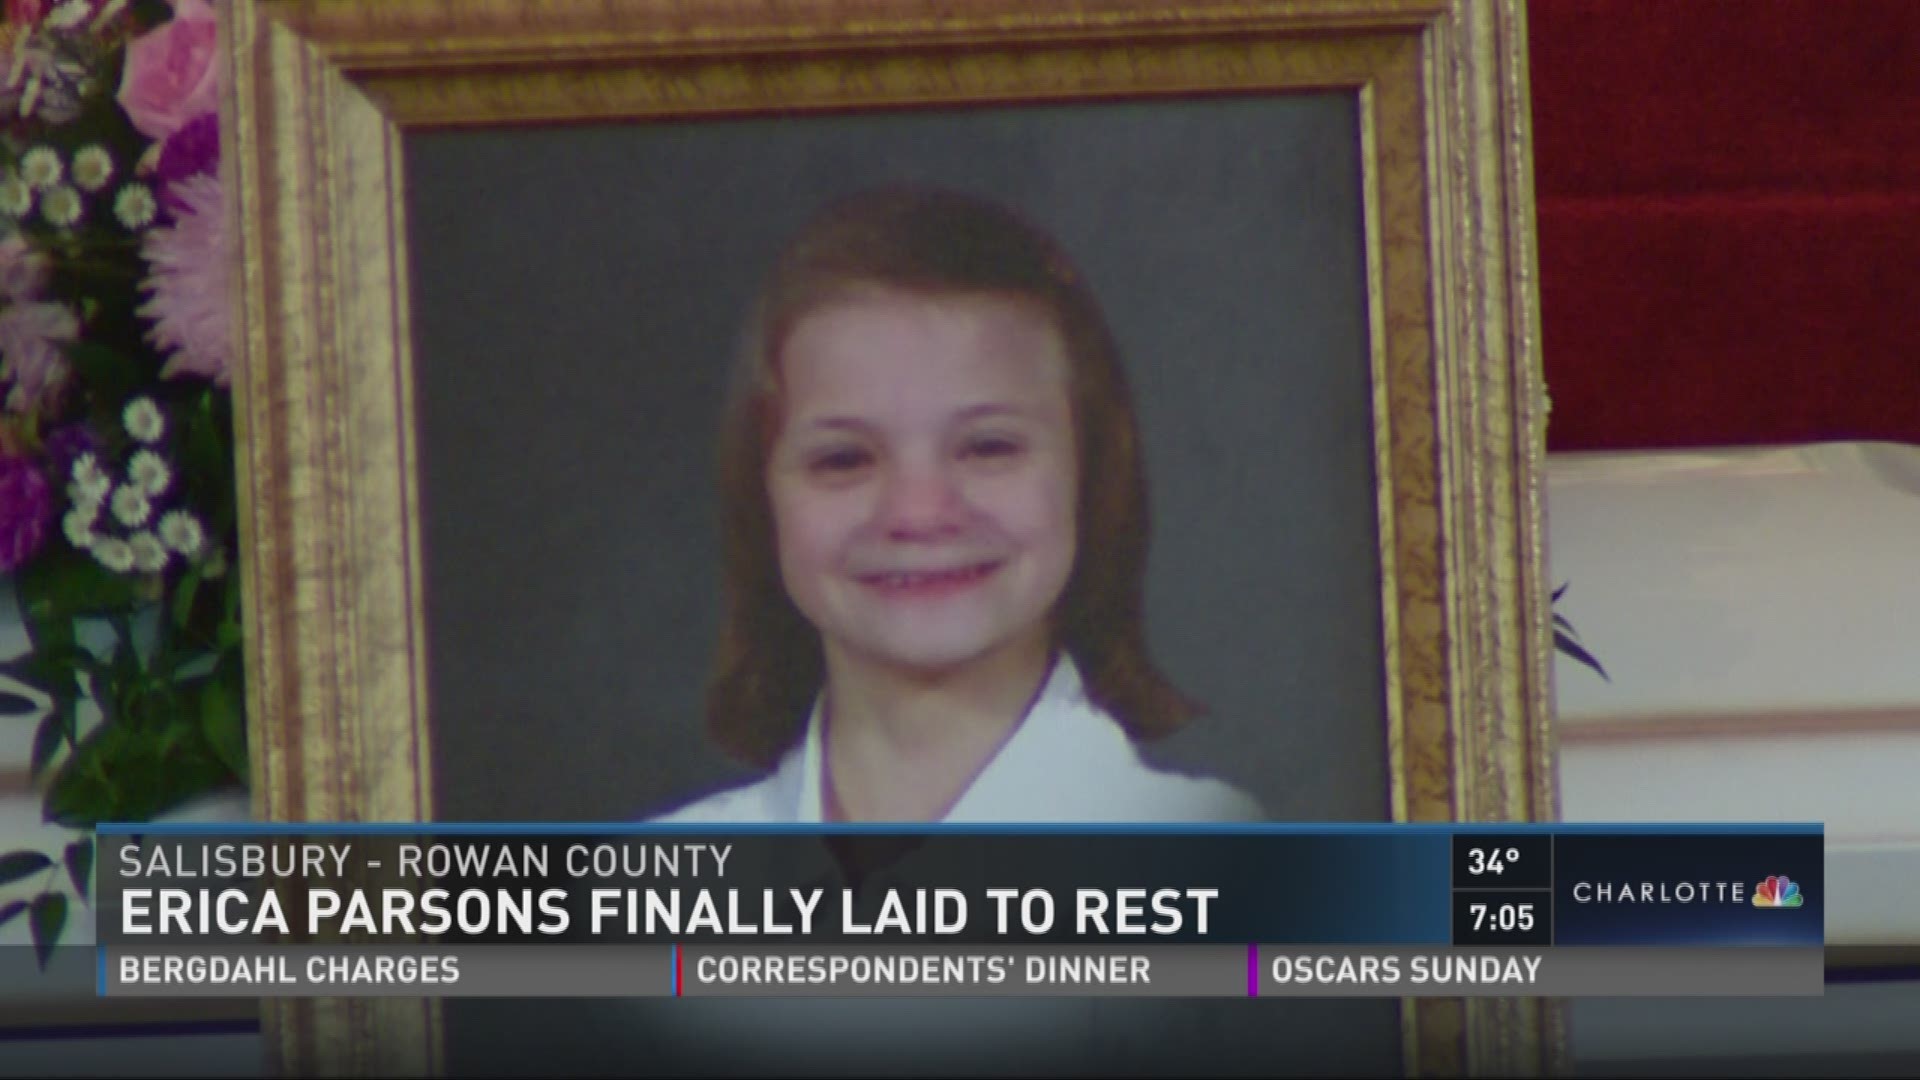 A community in Rowan County has closure after Erica Parsons was laid to rest.